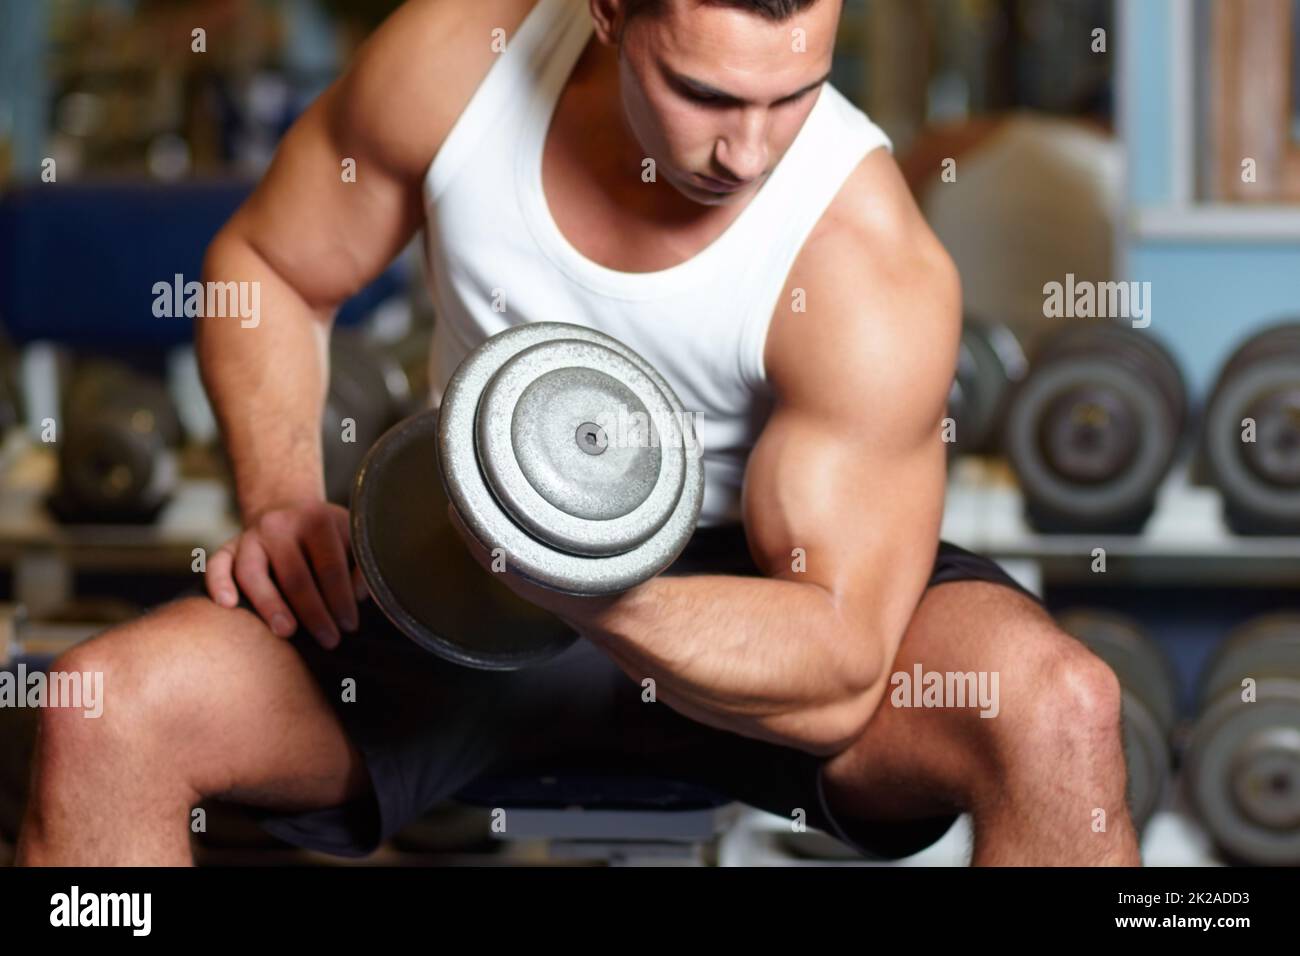 Building his biceps. A muscular young man working out in the gym. Stock Photo